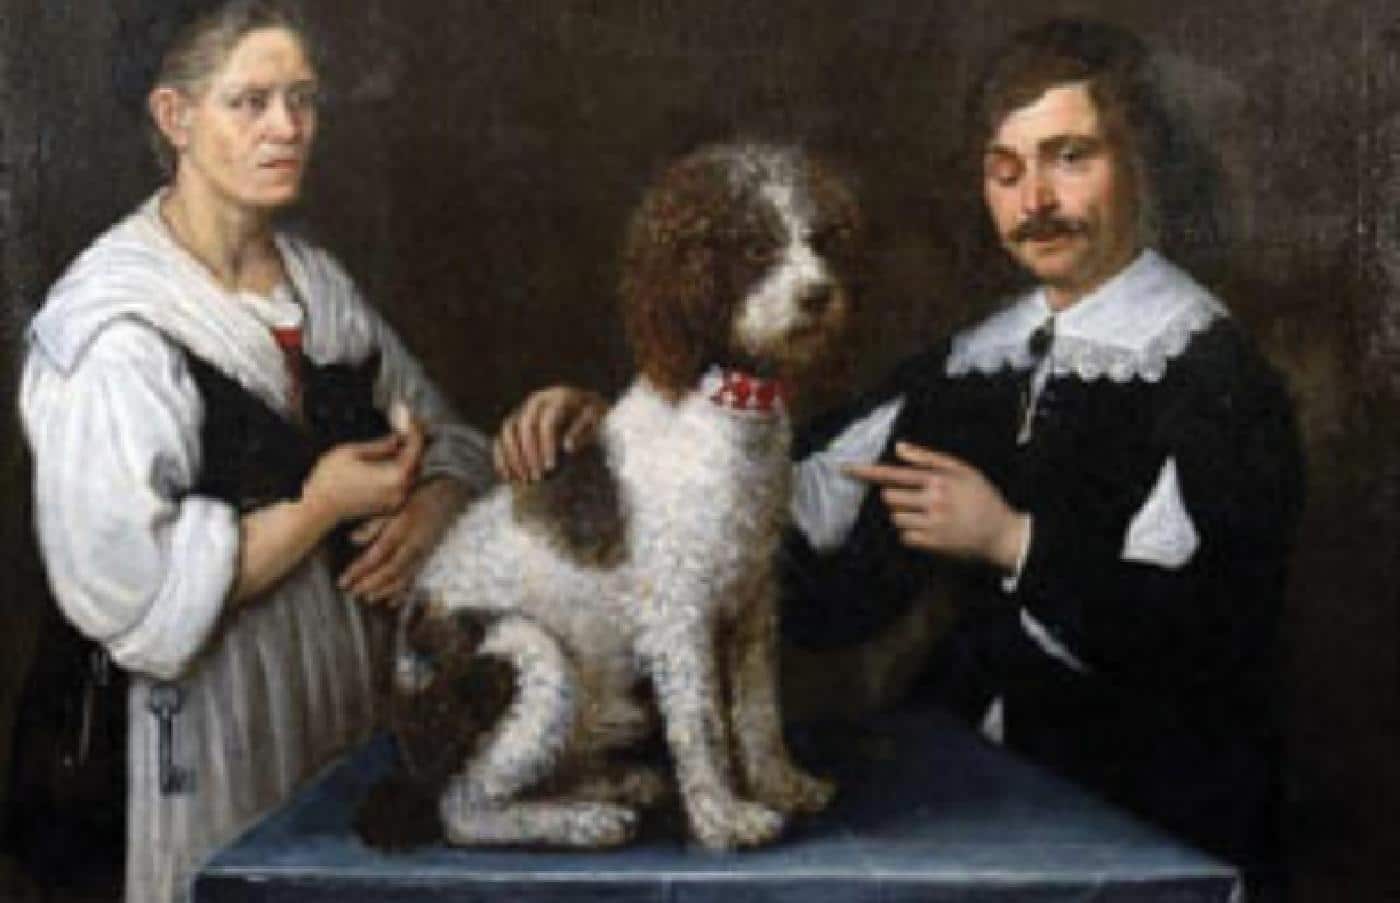 Painting of a Lagotto Romagnolo dog